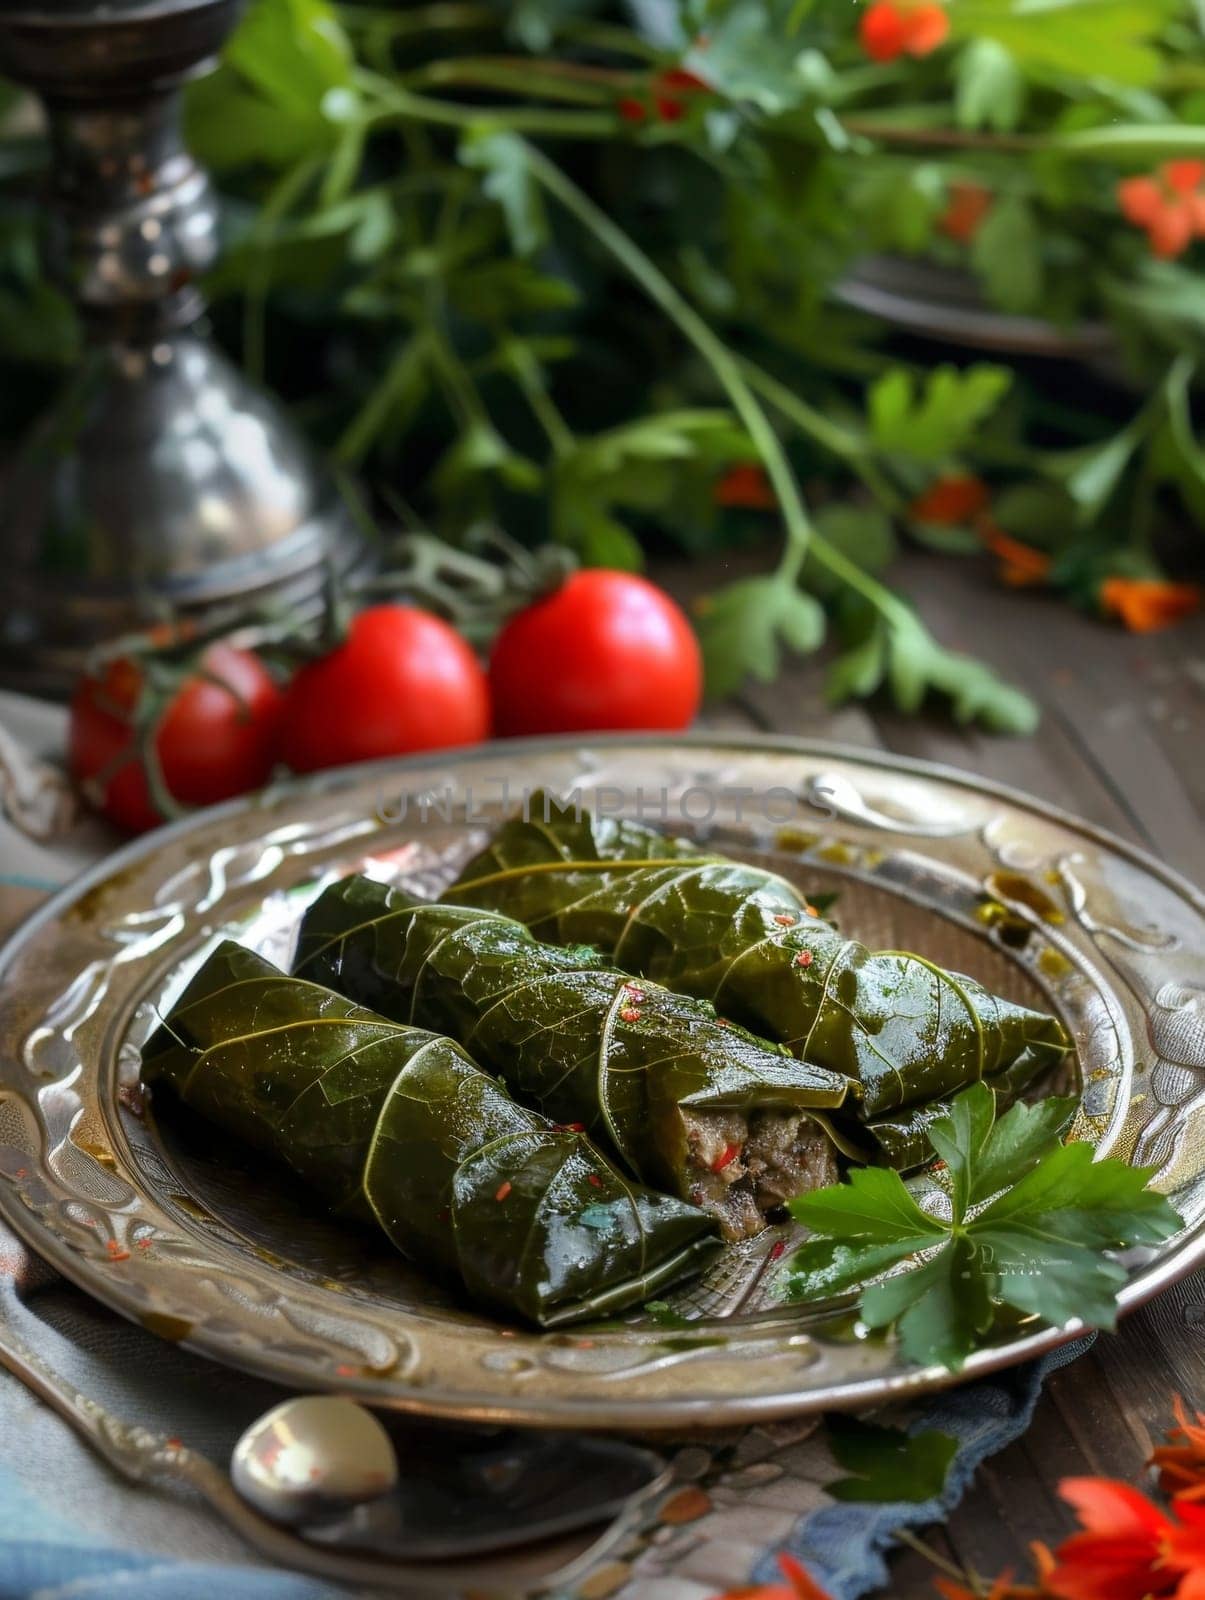 Traditional Armenian dolma made with stuffed grape leaves filled with a savory mixture of minced meat, rice, and aromatic herbs. This classic Mediterranean dish is a delightful representation. by sfinks